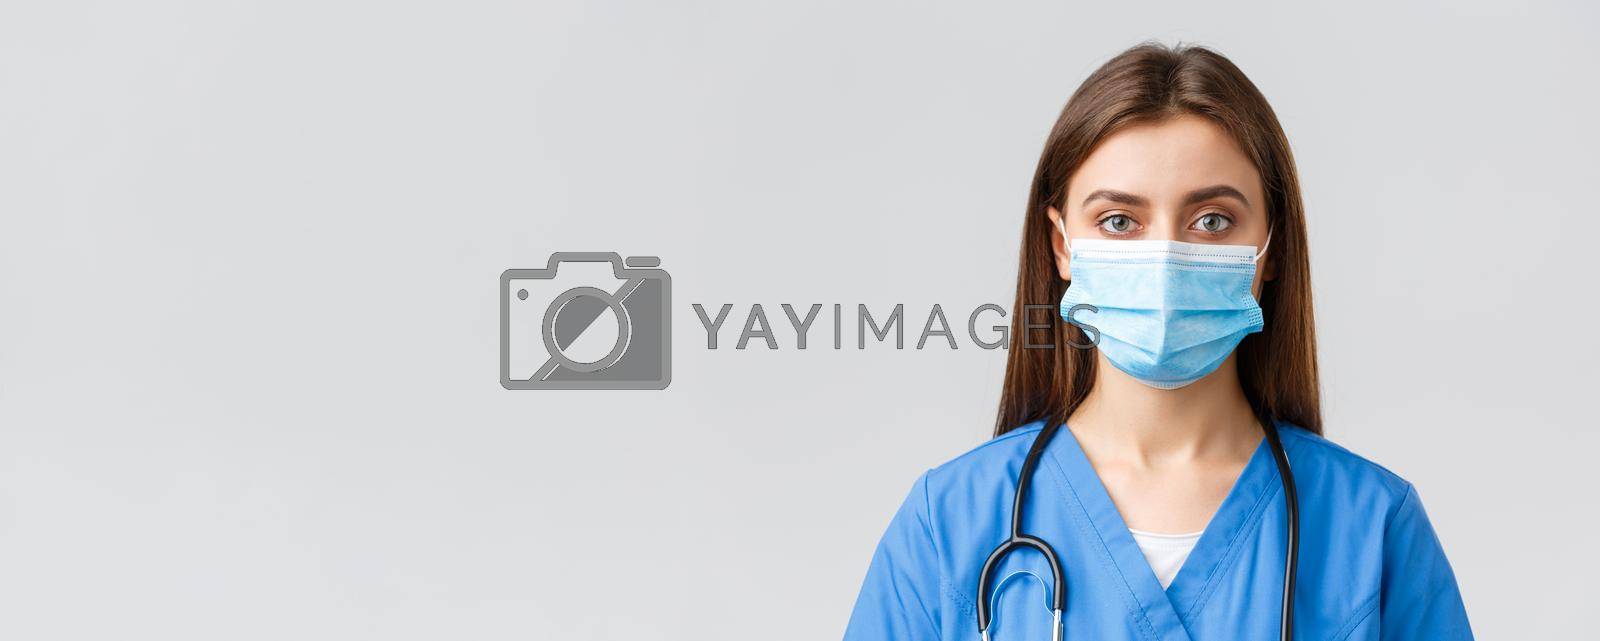 Covid-19, preventing virus, health, healthcare workers and quarantine concept. Close-up young female nurse or doctor in blue scrubs and medical mask looking serious at camera.